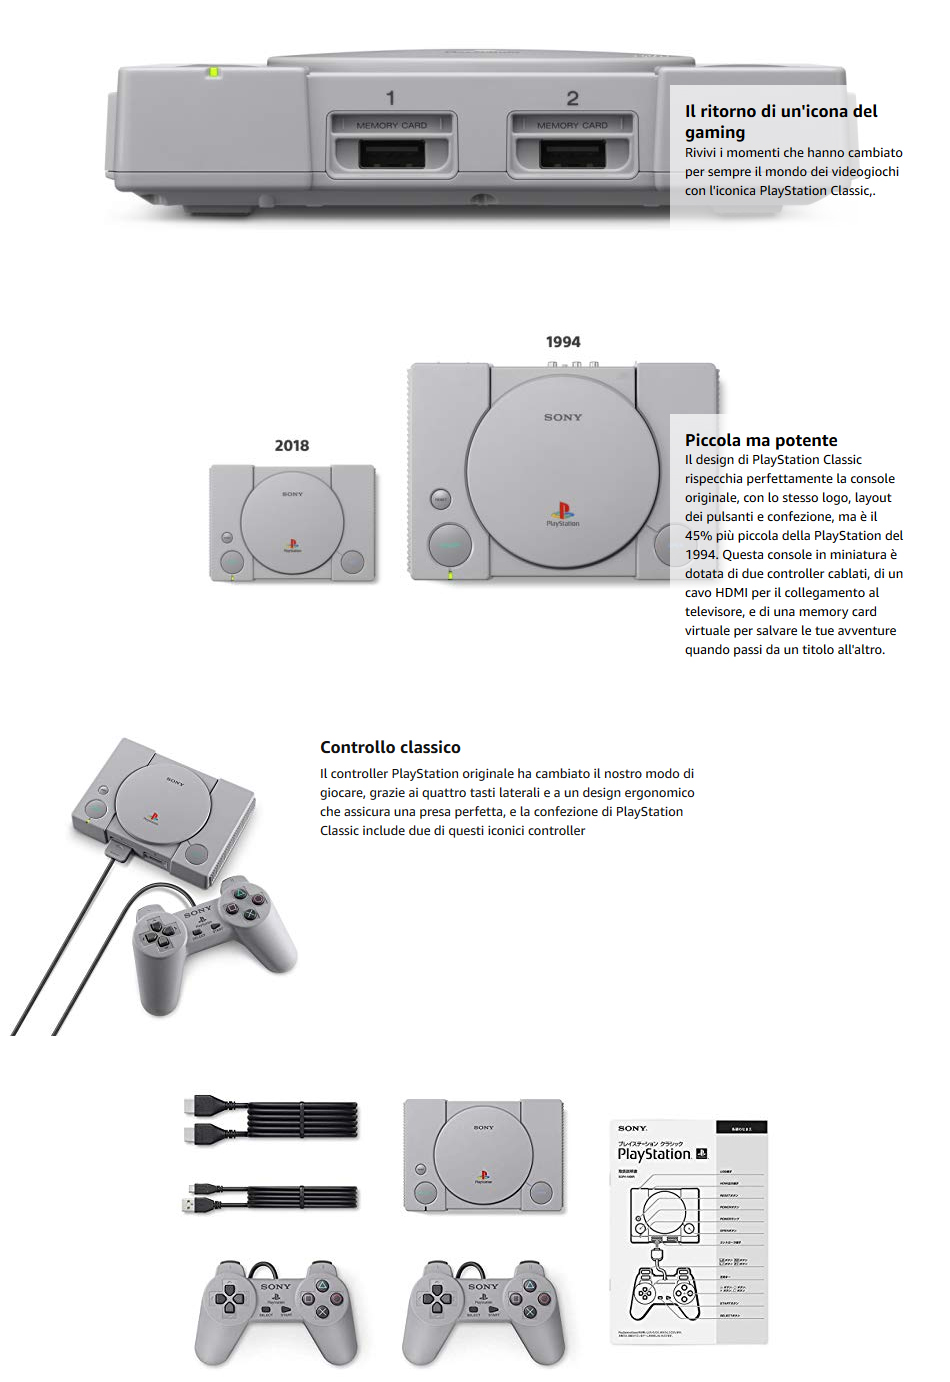 playstation classic memory card